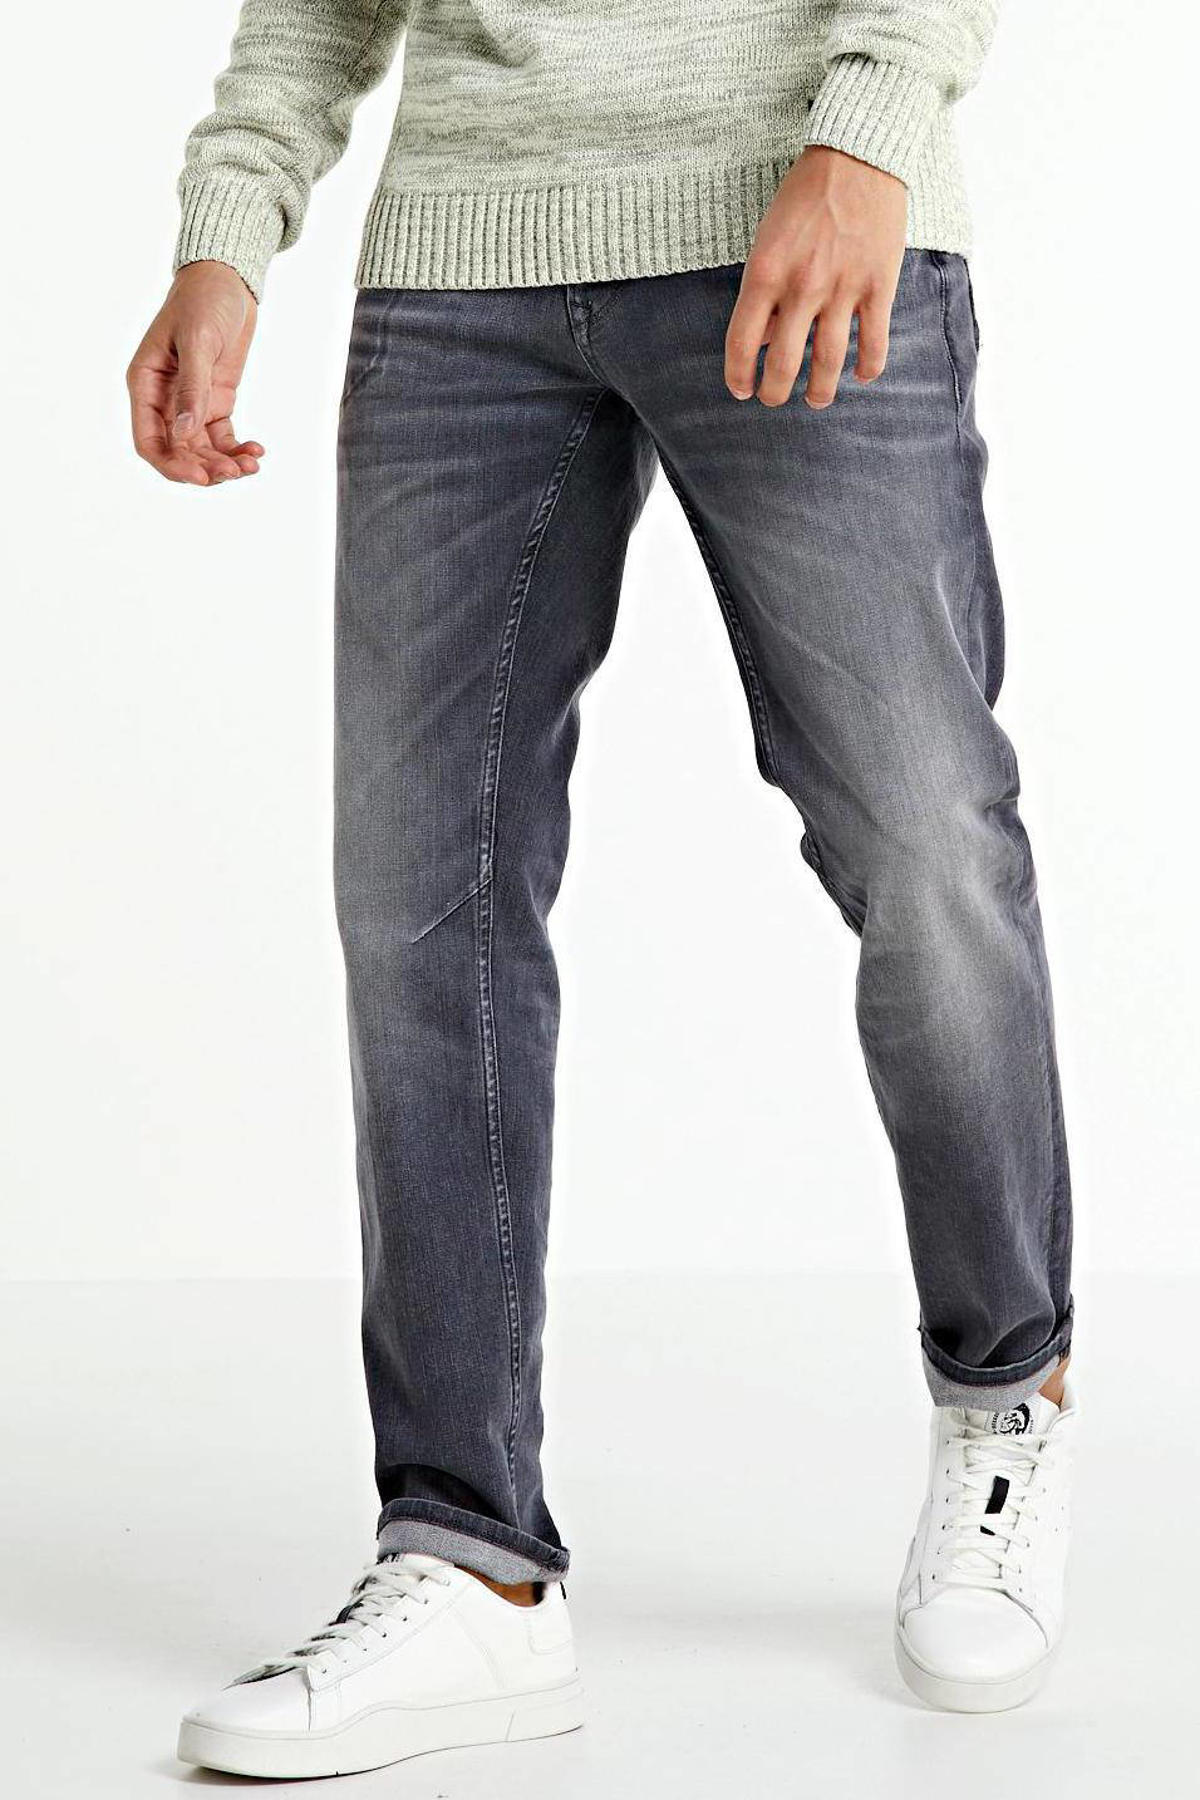 club Gewoon overlopen Ongeautoriseerd PME Legend relaxed tapered fit jeans Skymaster grey wash | wehkamp